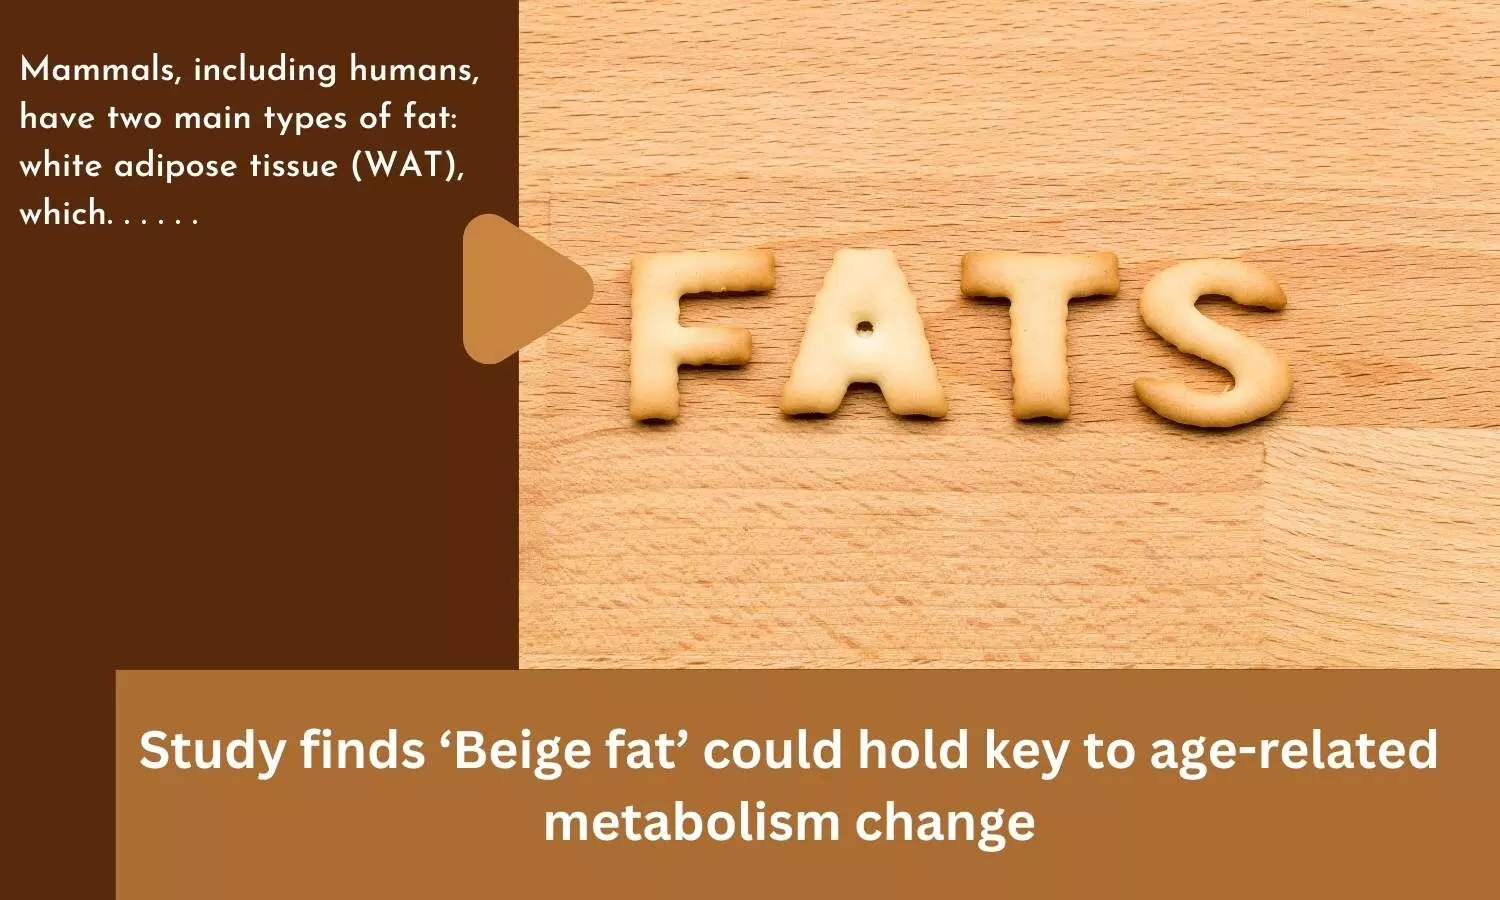 Study finds Beige fat could hold key to age-related metabolism change